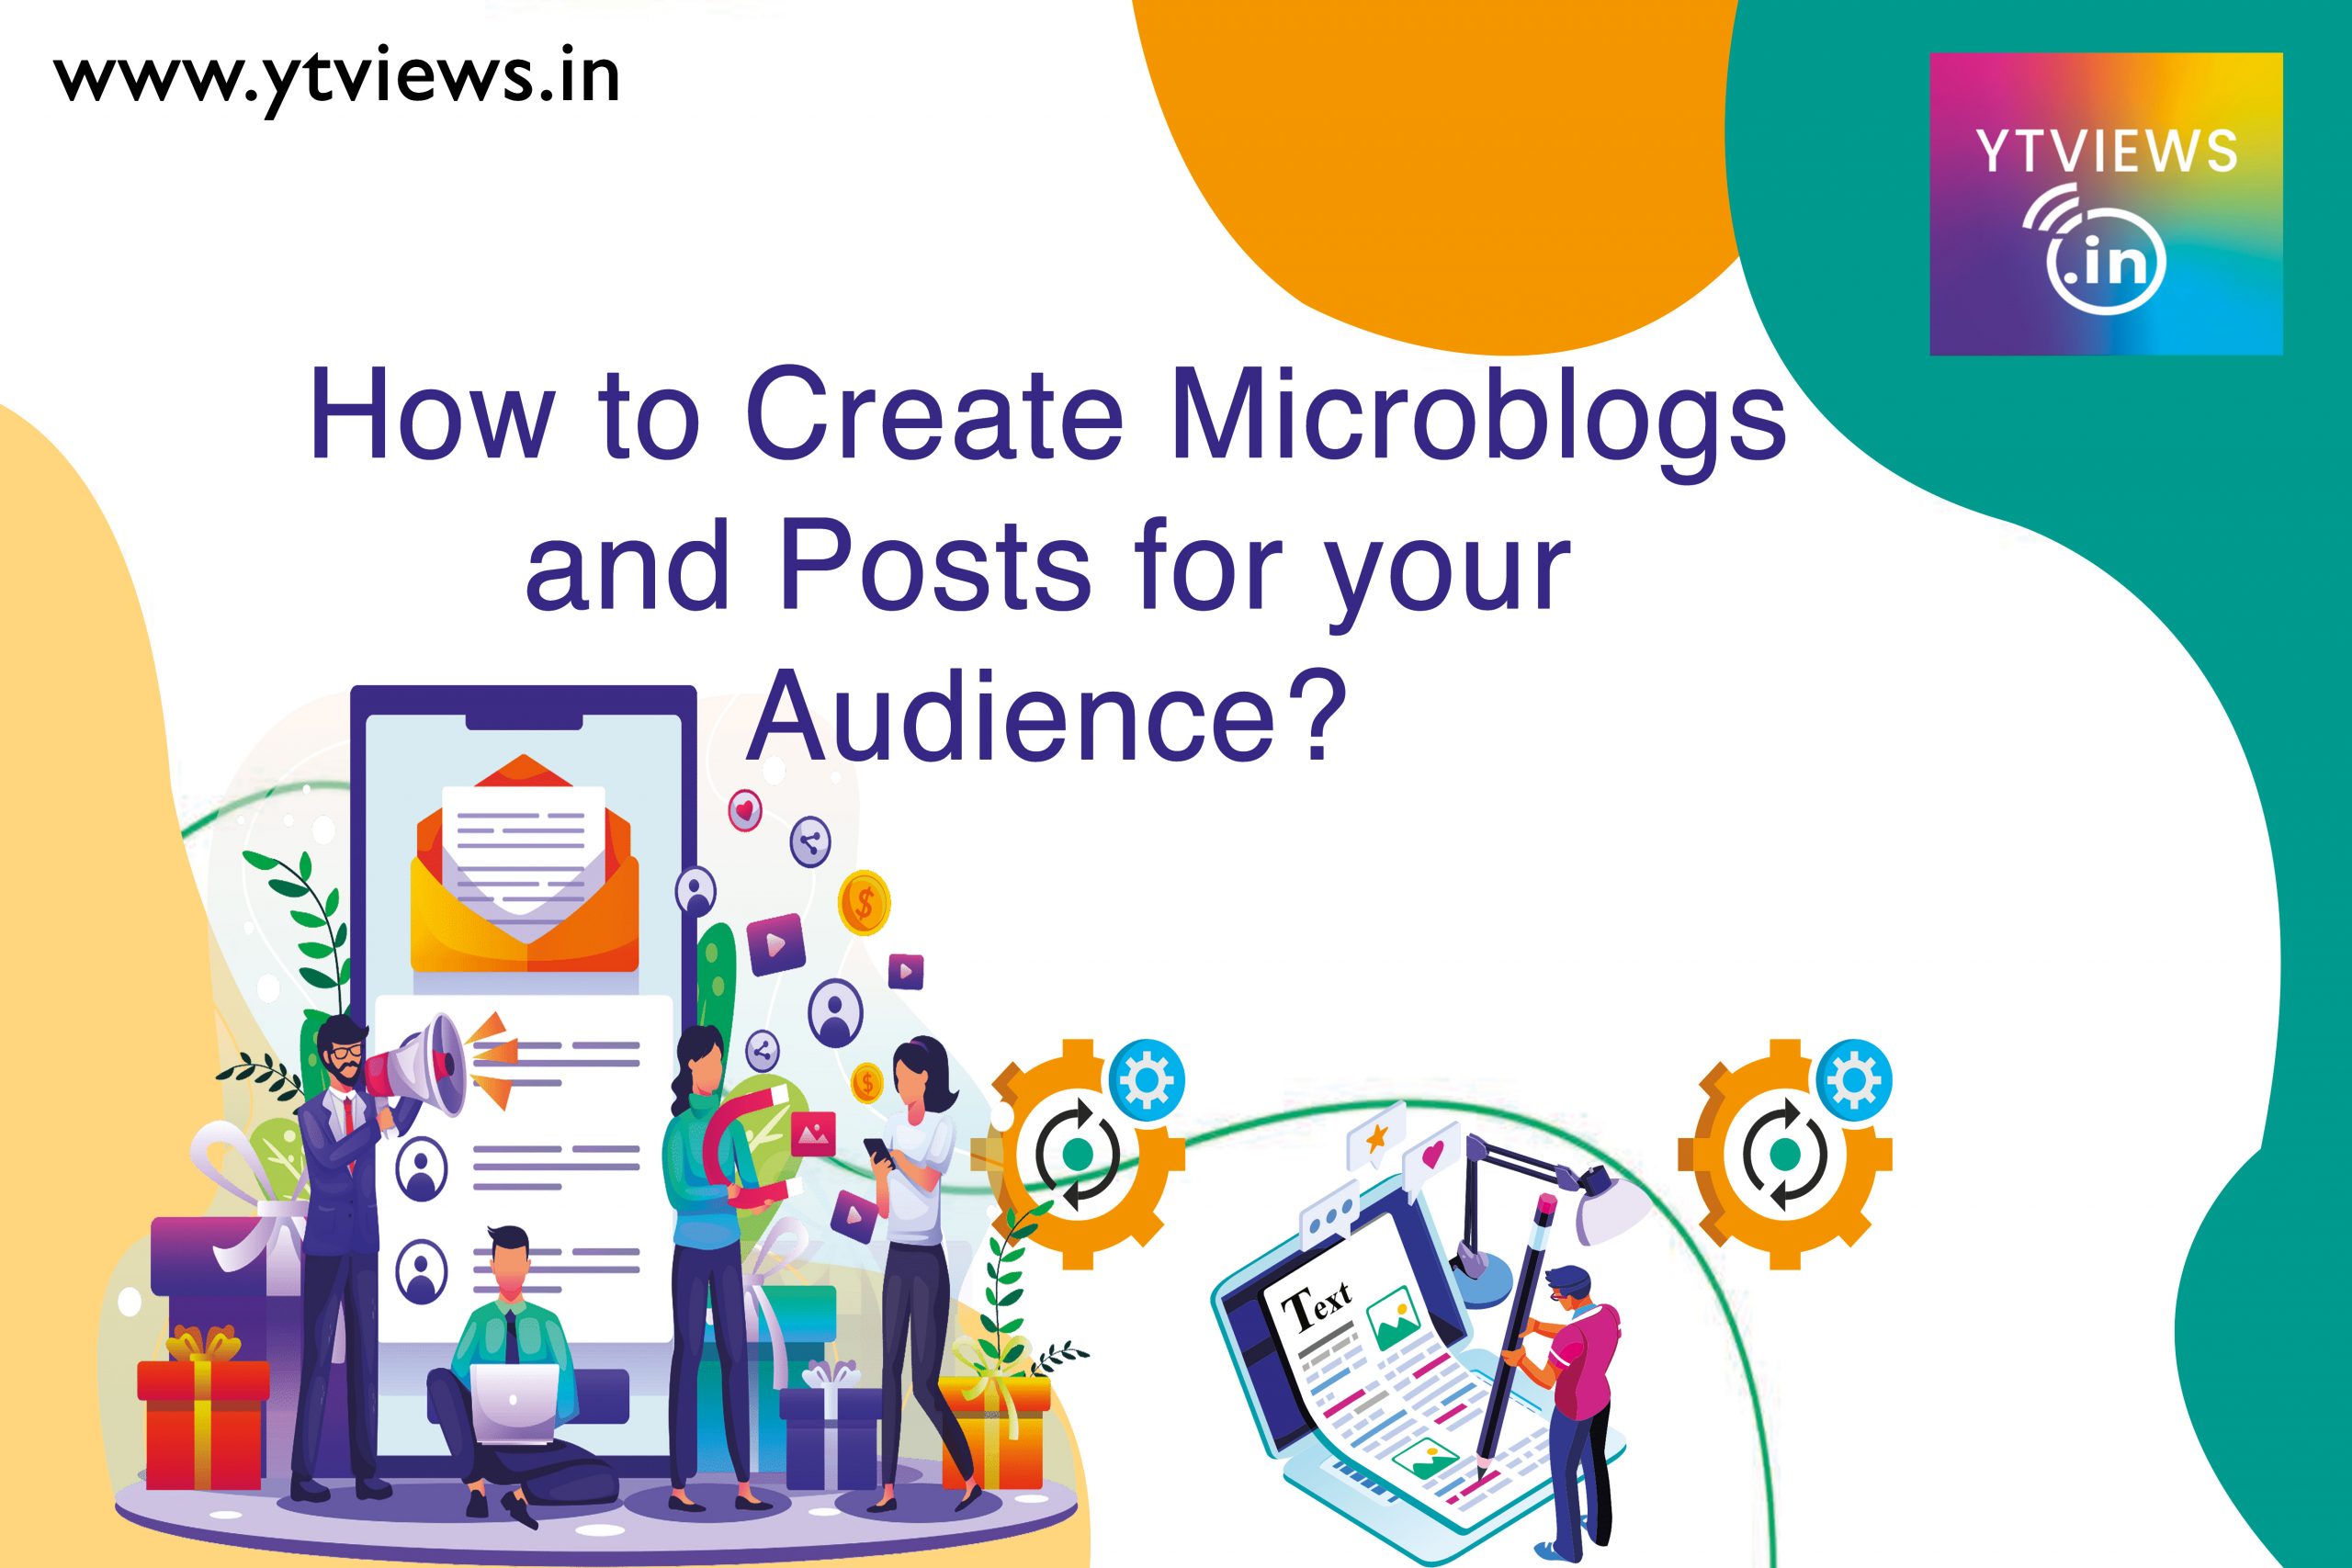 How to Create Microblogs and Posts for your Audience?